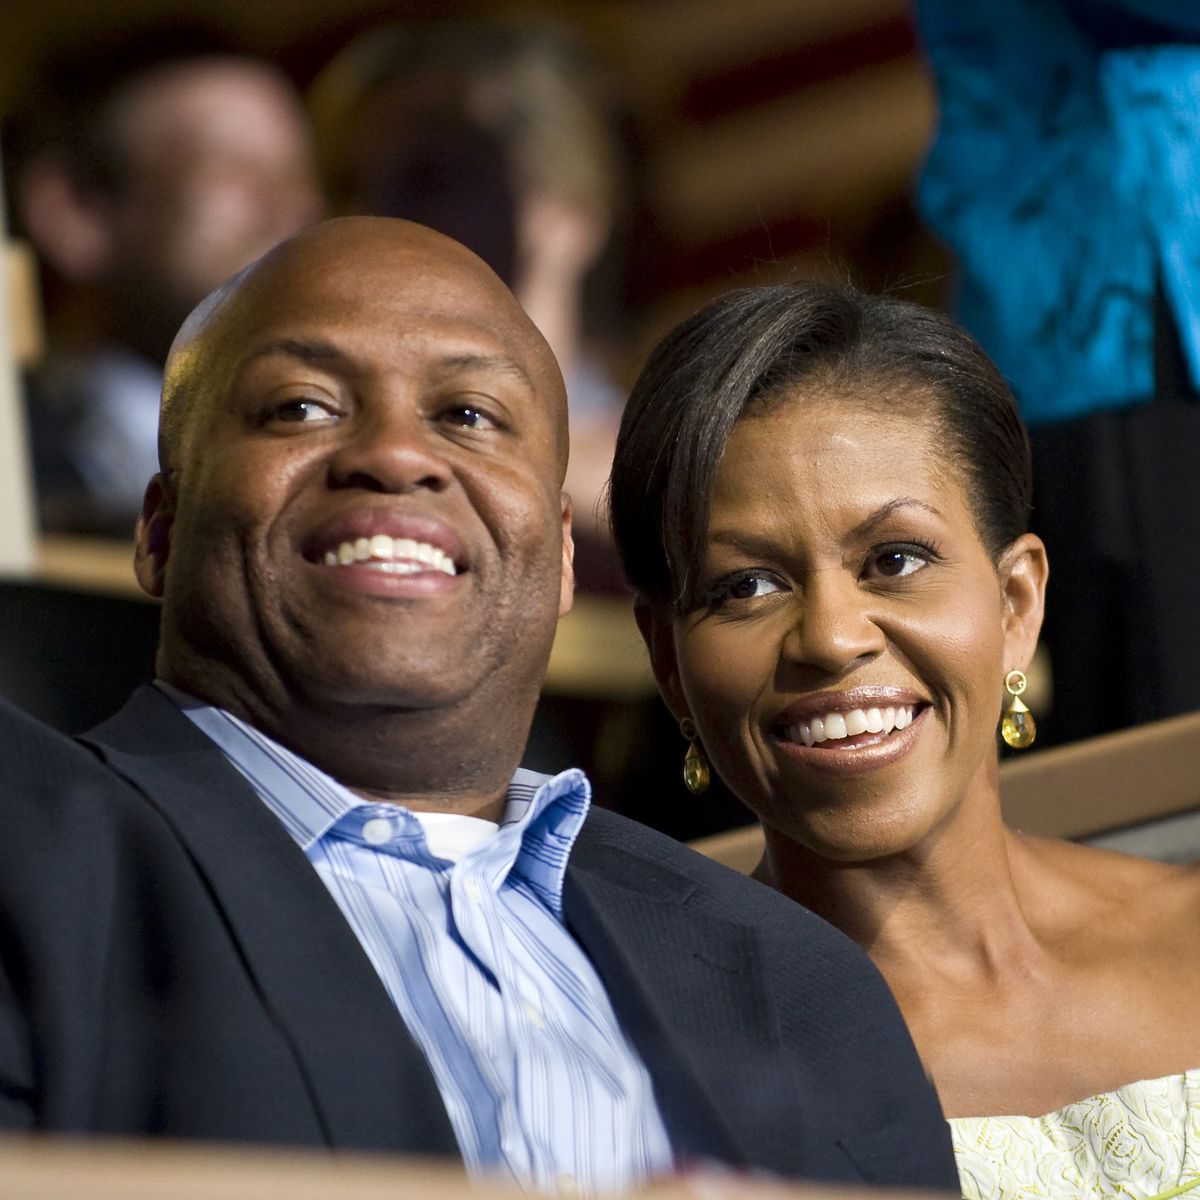 michelle obama and her brother craig robinson attend the democratic national convention in denver photo by rick friedmancorbis via getty images